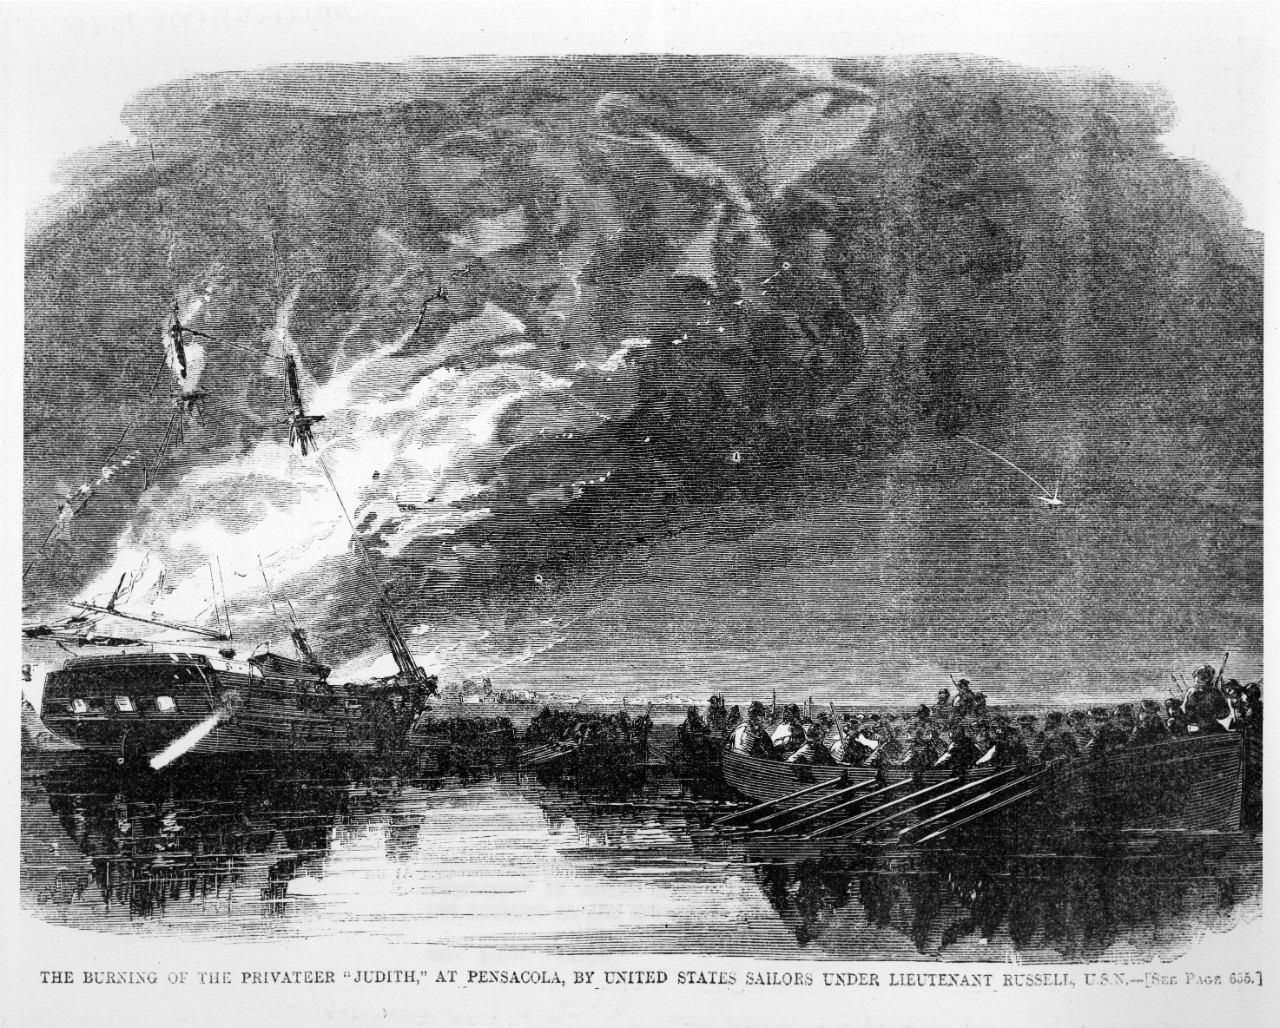 NH 59157 The Burning of the Confederate Privateer Judah at Pensacola on 14 September 1861